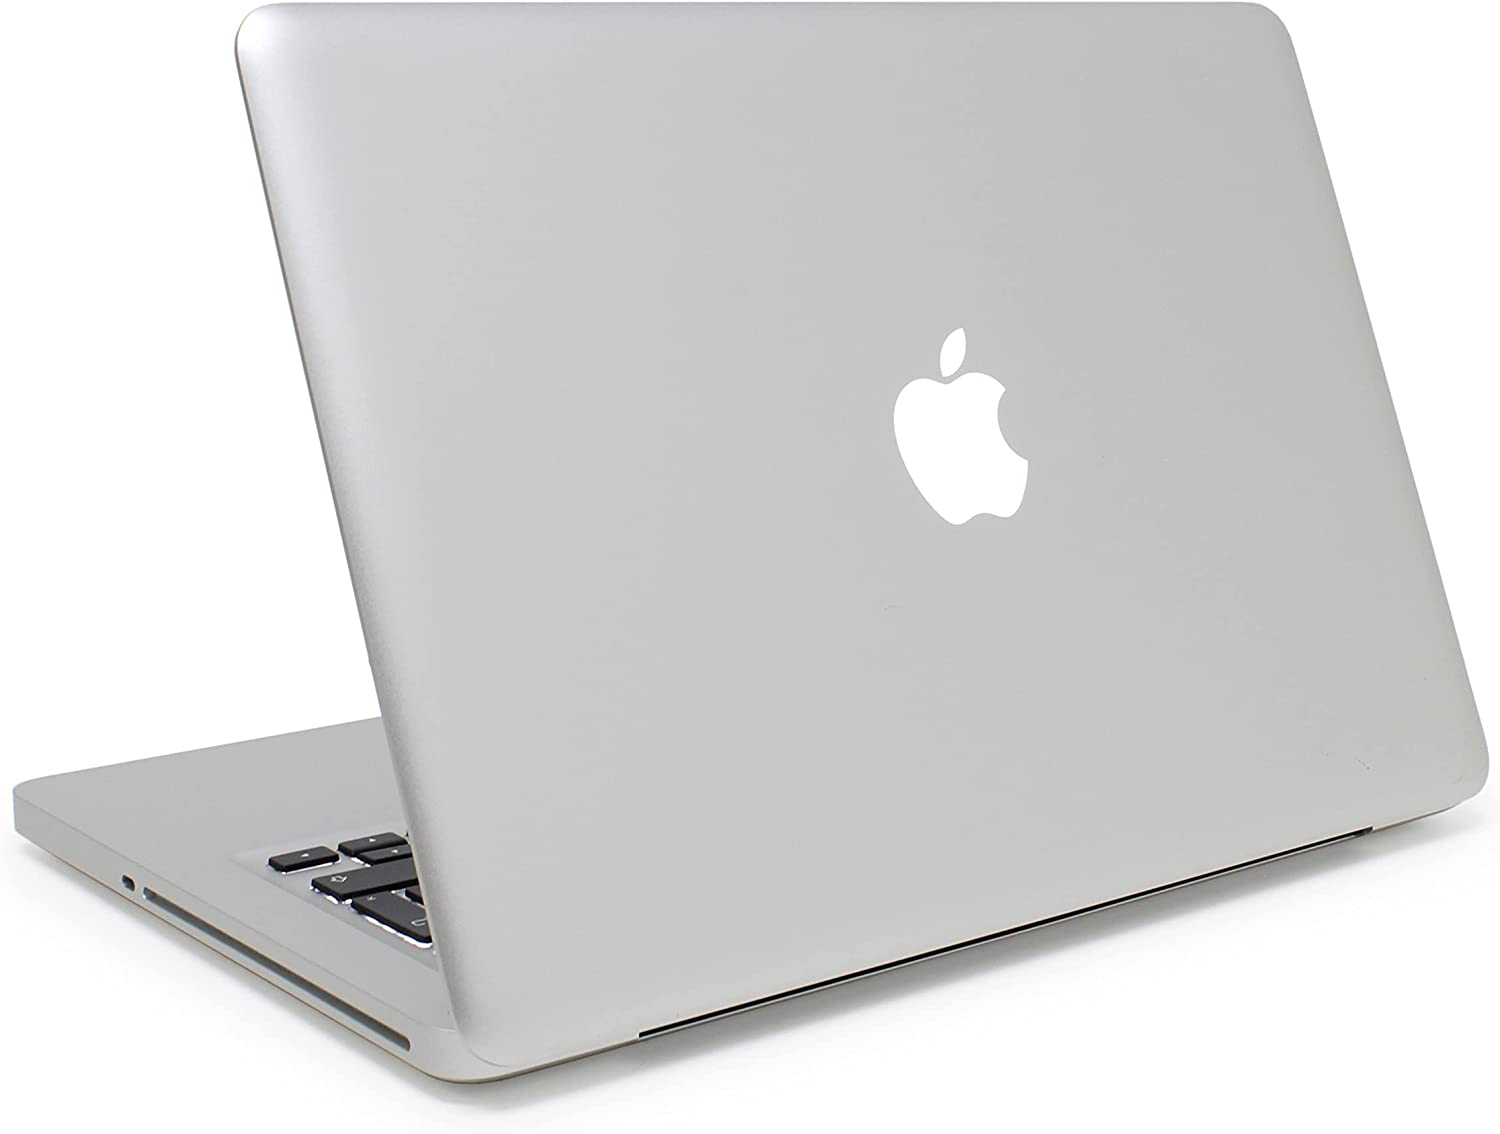 APPLE Macbook Pro 8.1, 13 Inches Early 2011 2.3GHz, i5, 4GB RAM, 256GB SSD, ENG KB, A1278 - Silver (Renewed)